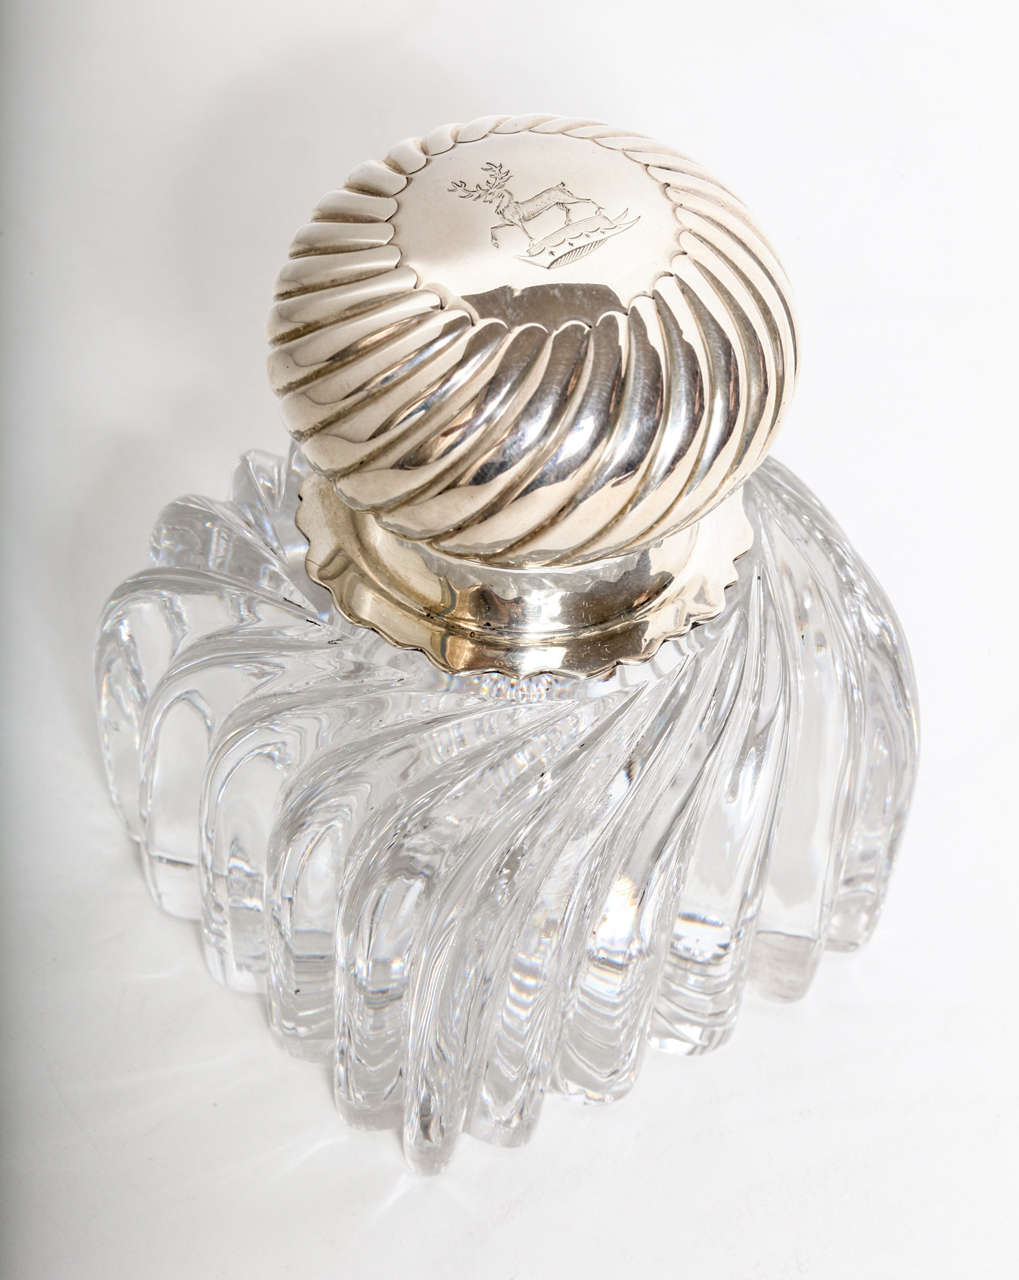 A beautiful late Victorian sterling silver and crystal body ink well.  The design runs through both materials as it appears to have been turned from the top through to the base.  The cartouche on the top of the lid has been beautifully hand engraved